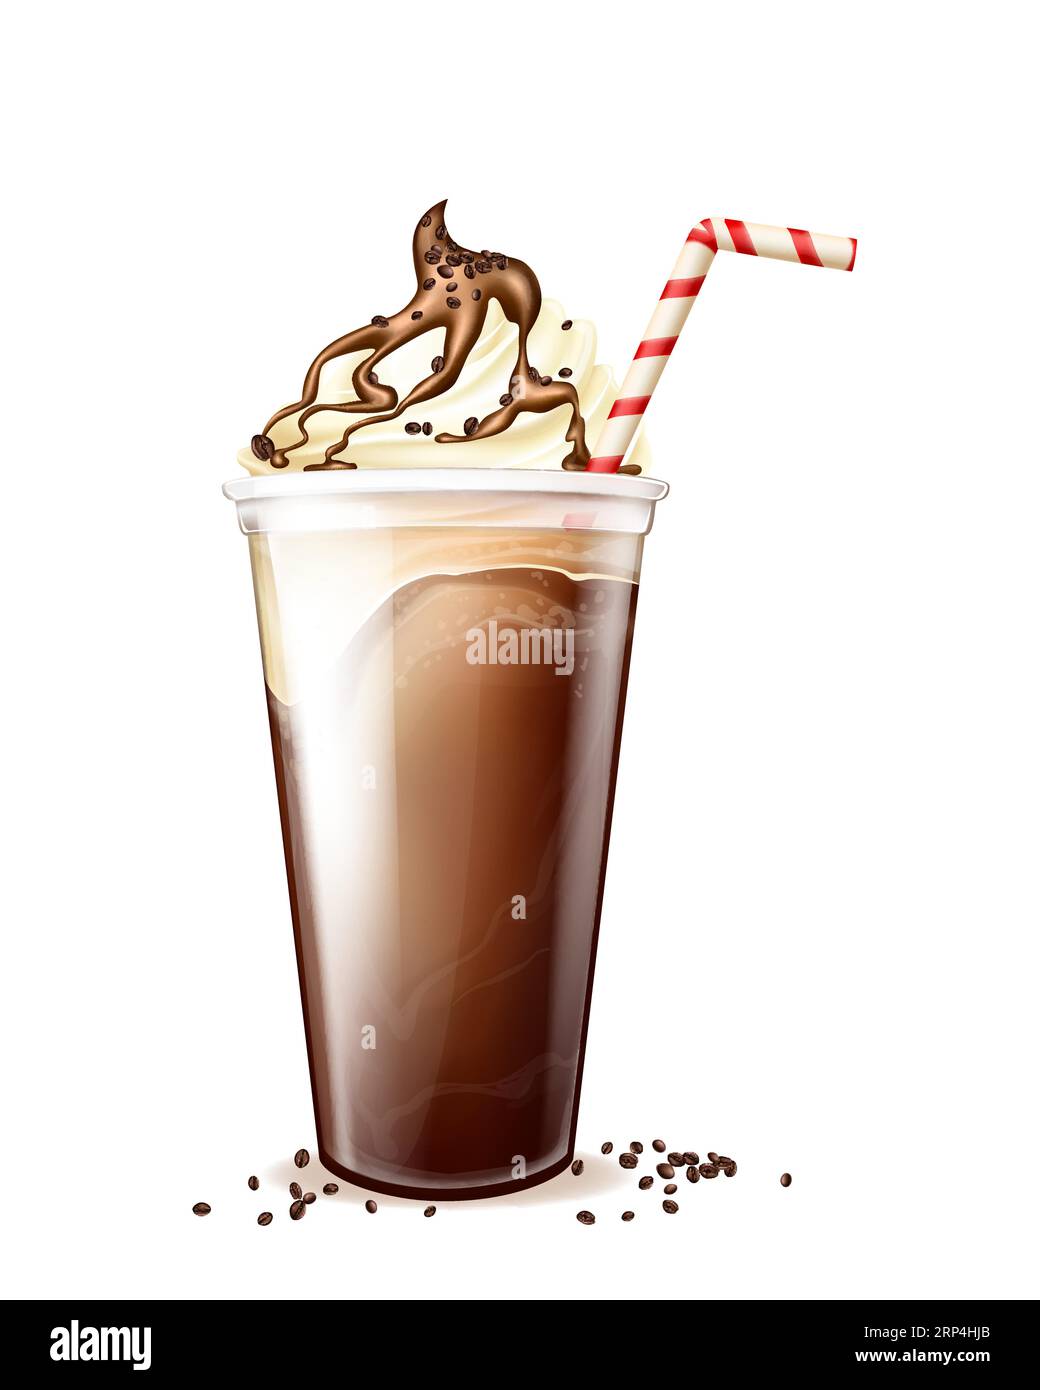 https://c8.alamy.com/comp/2RP4HJB/frappe-coffee-frappucino-in-disposable-plastic-cup-with-straw-whipped-cream-chocolate-or-caramel-topping-and-scattered-beans-cold-milkshake-cockta-2RP4HJB.jpg